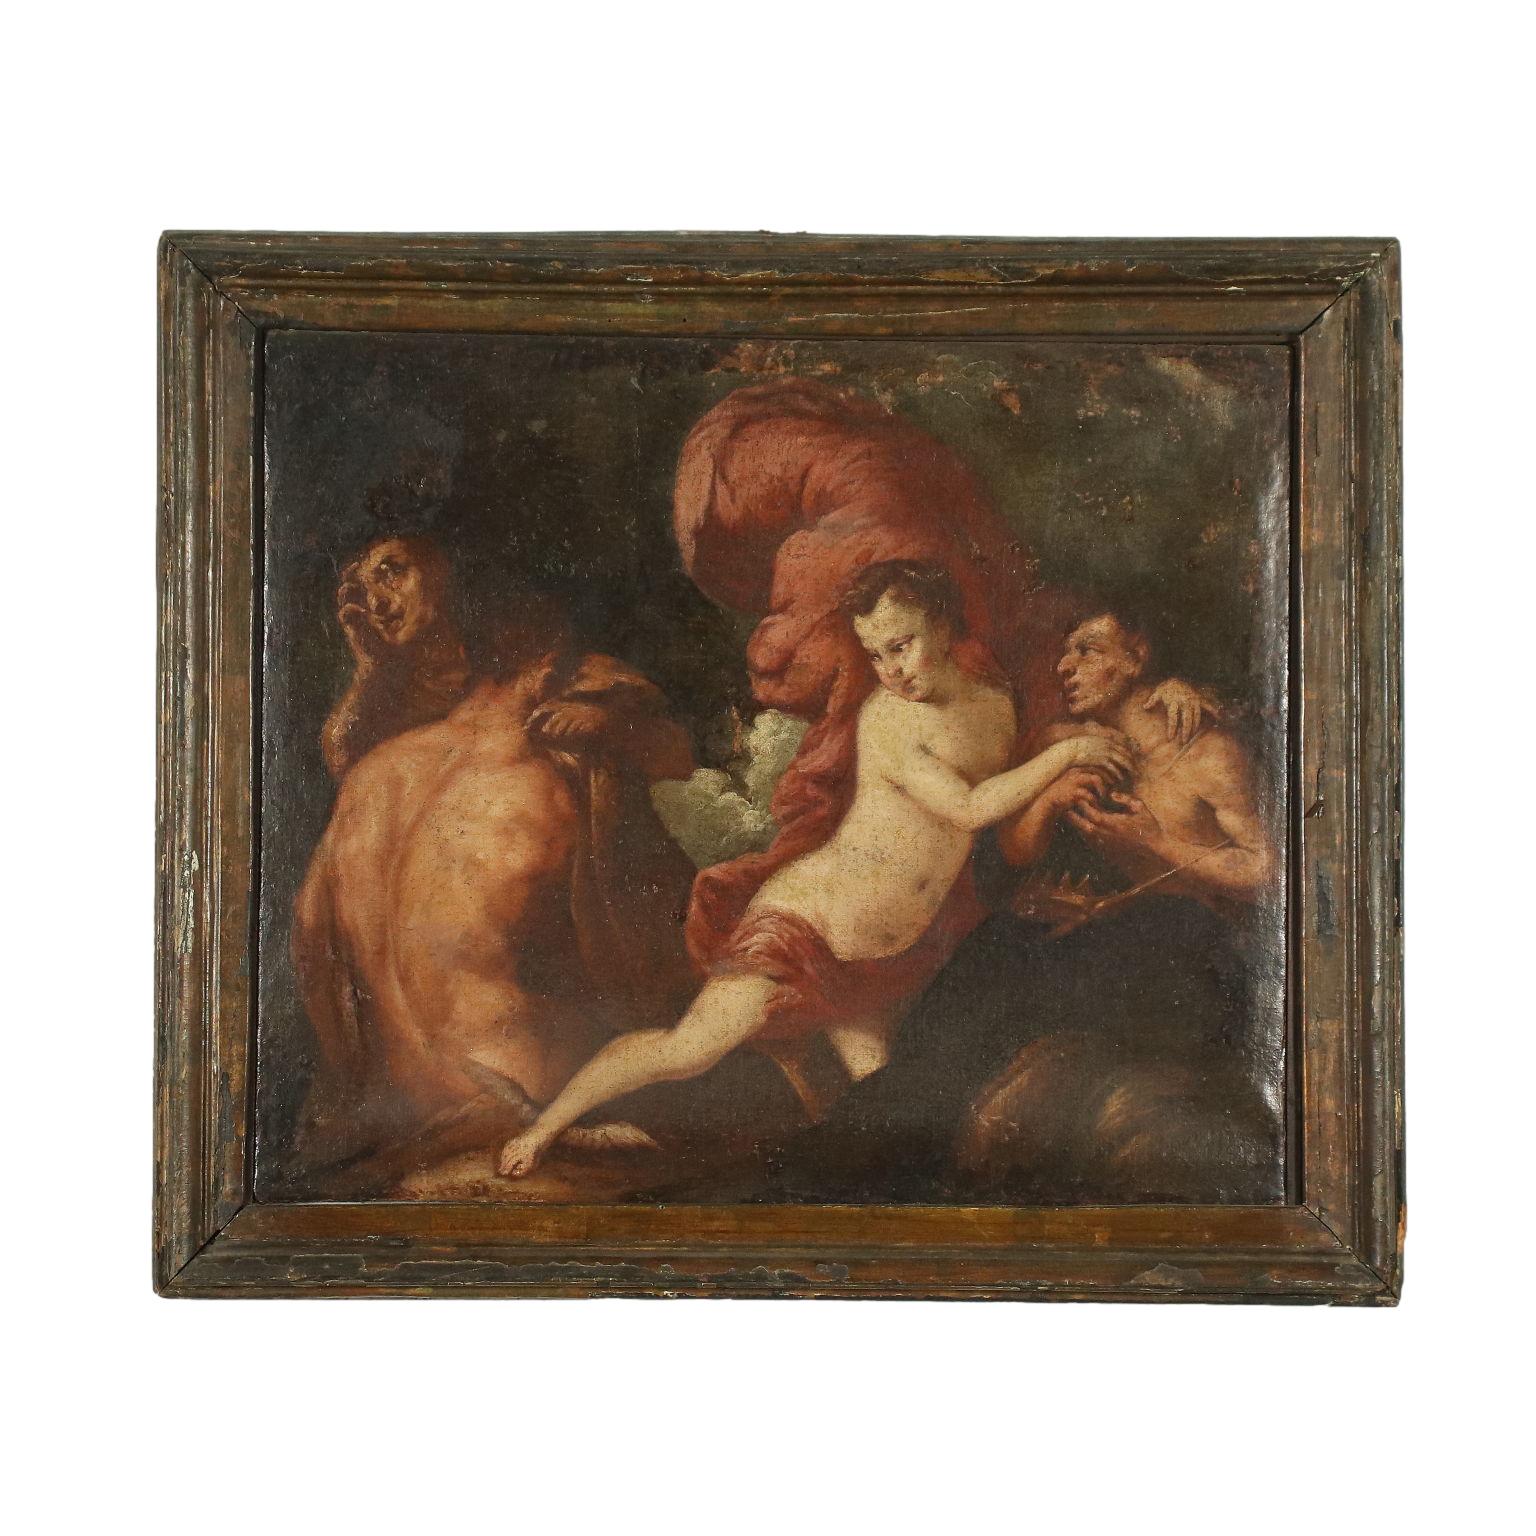 Unknown Figurative Painting - Mythological Subject Oil On Canvas 17th 18th Century